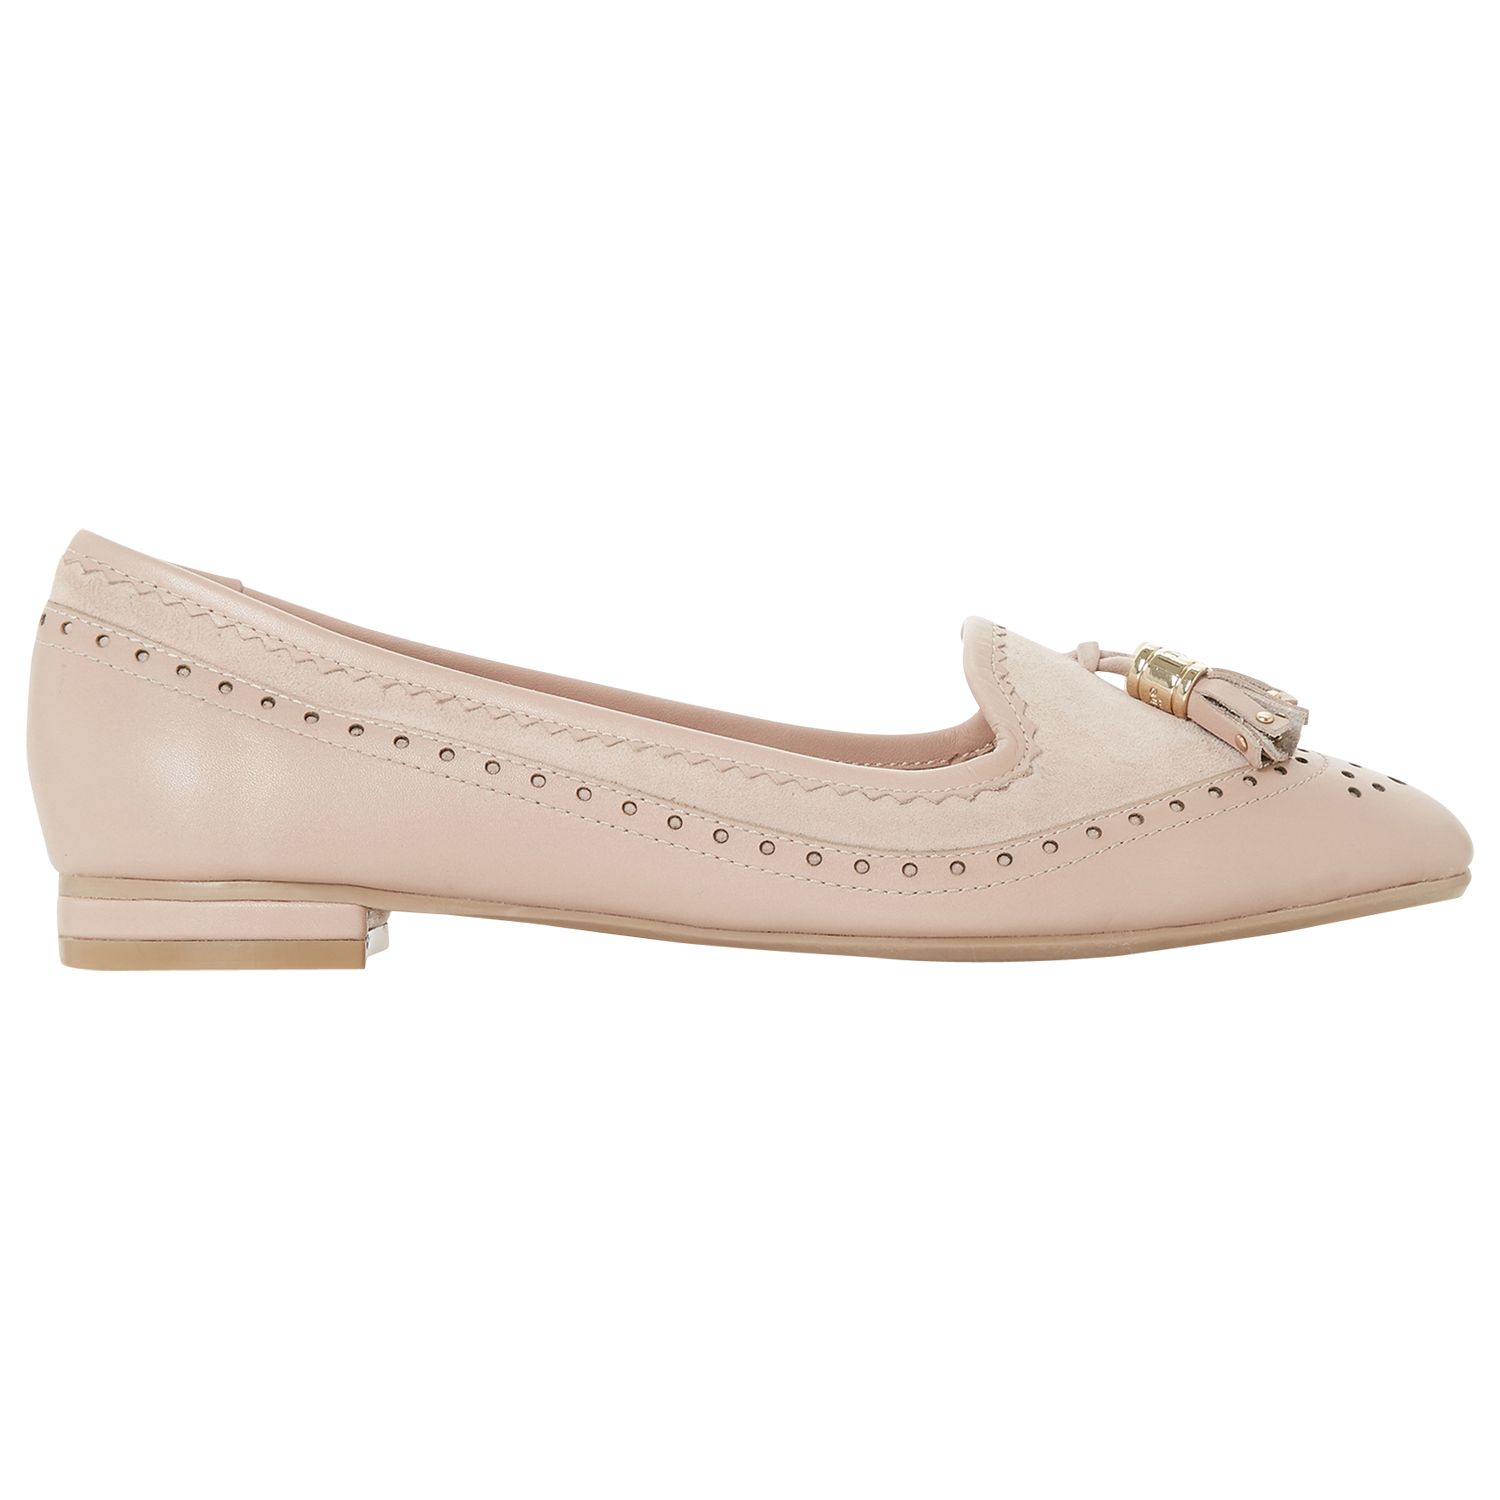 Dune Gambie Leather Loafers, Blush, 7